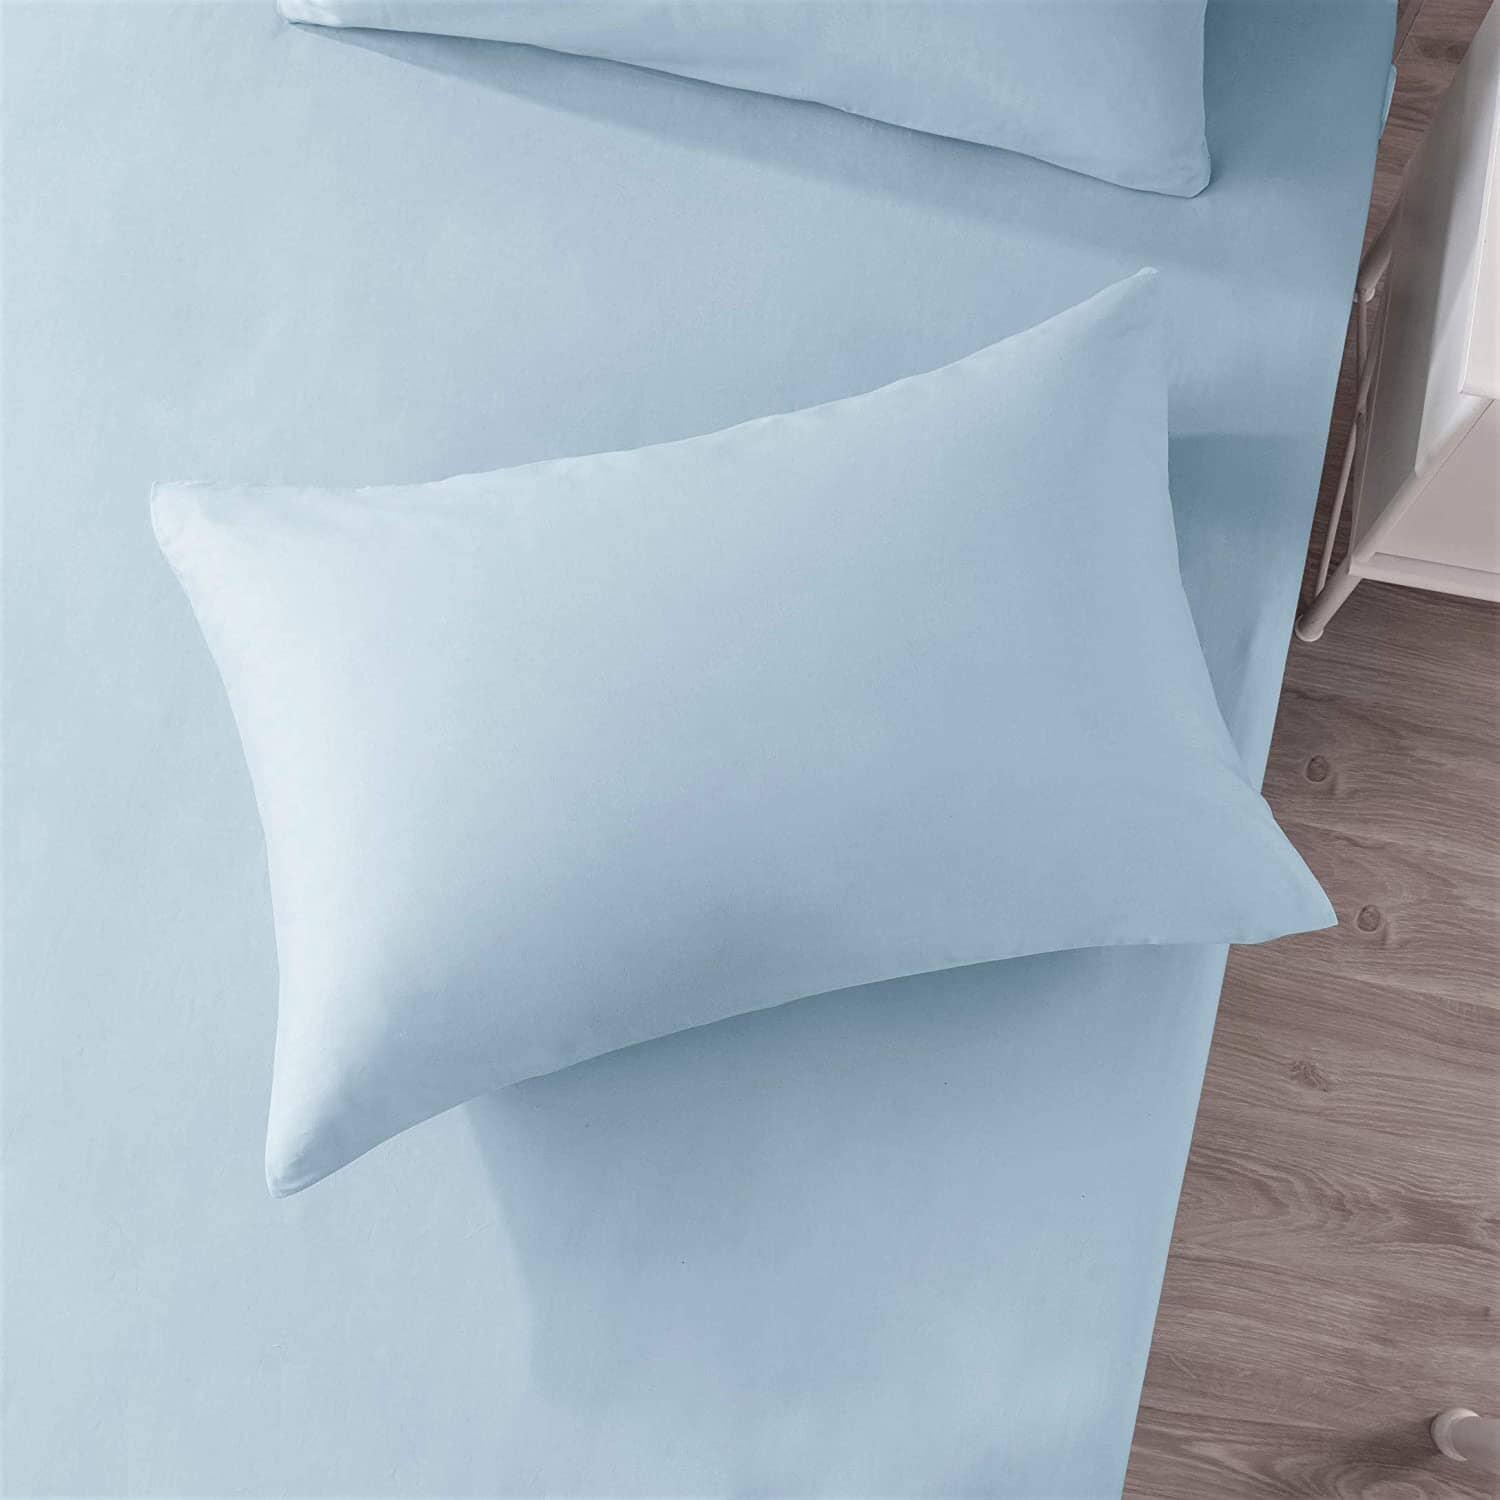 High quality Light sky Blue Cotton Fitted Sheet and Pillowcase Set for ultimate comfort. 100% premium cotton construction, available in twin, full, queen, king, and California king sizes